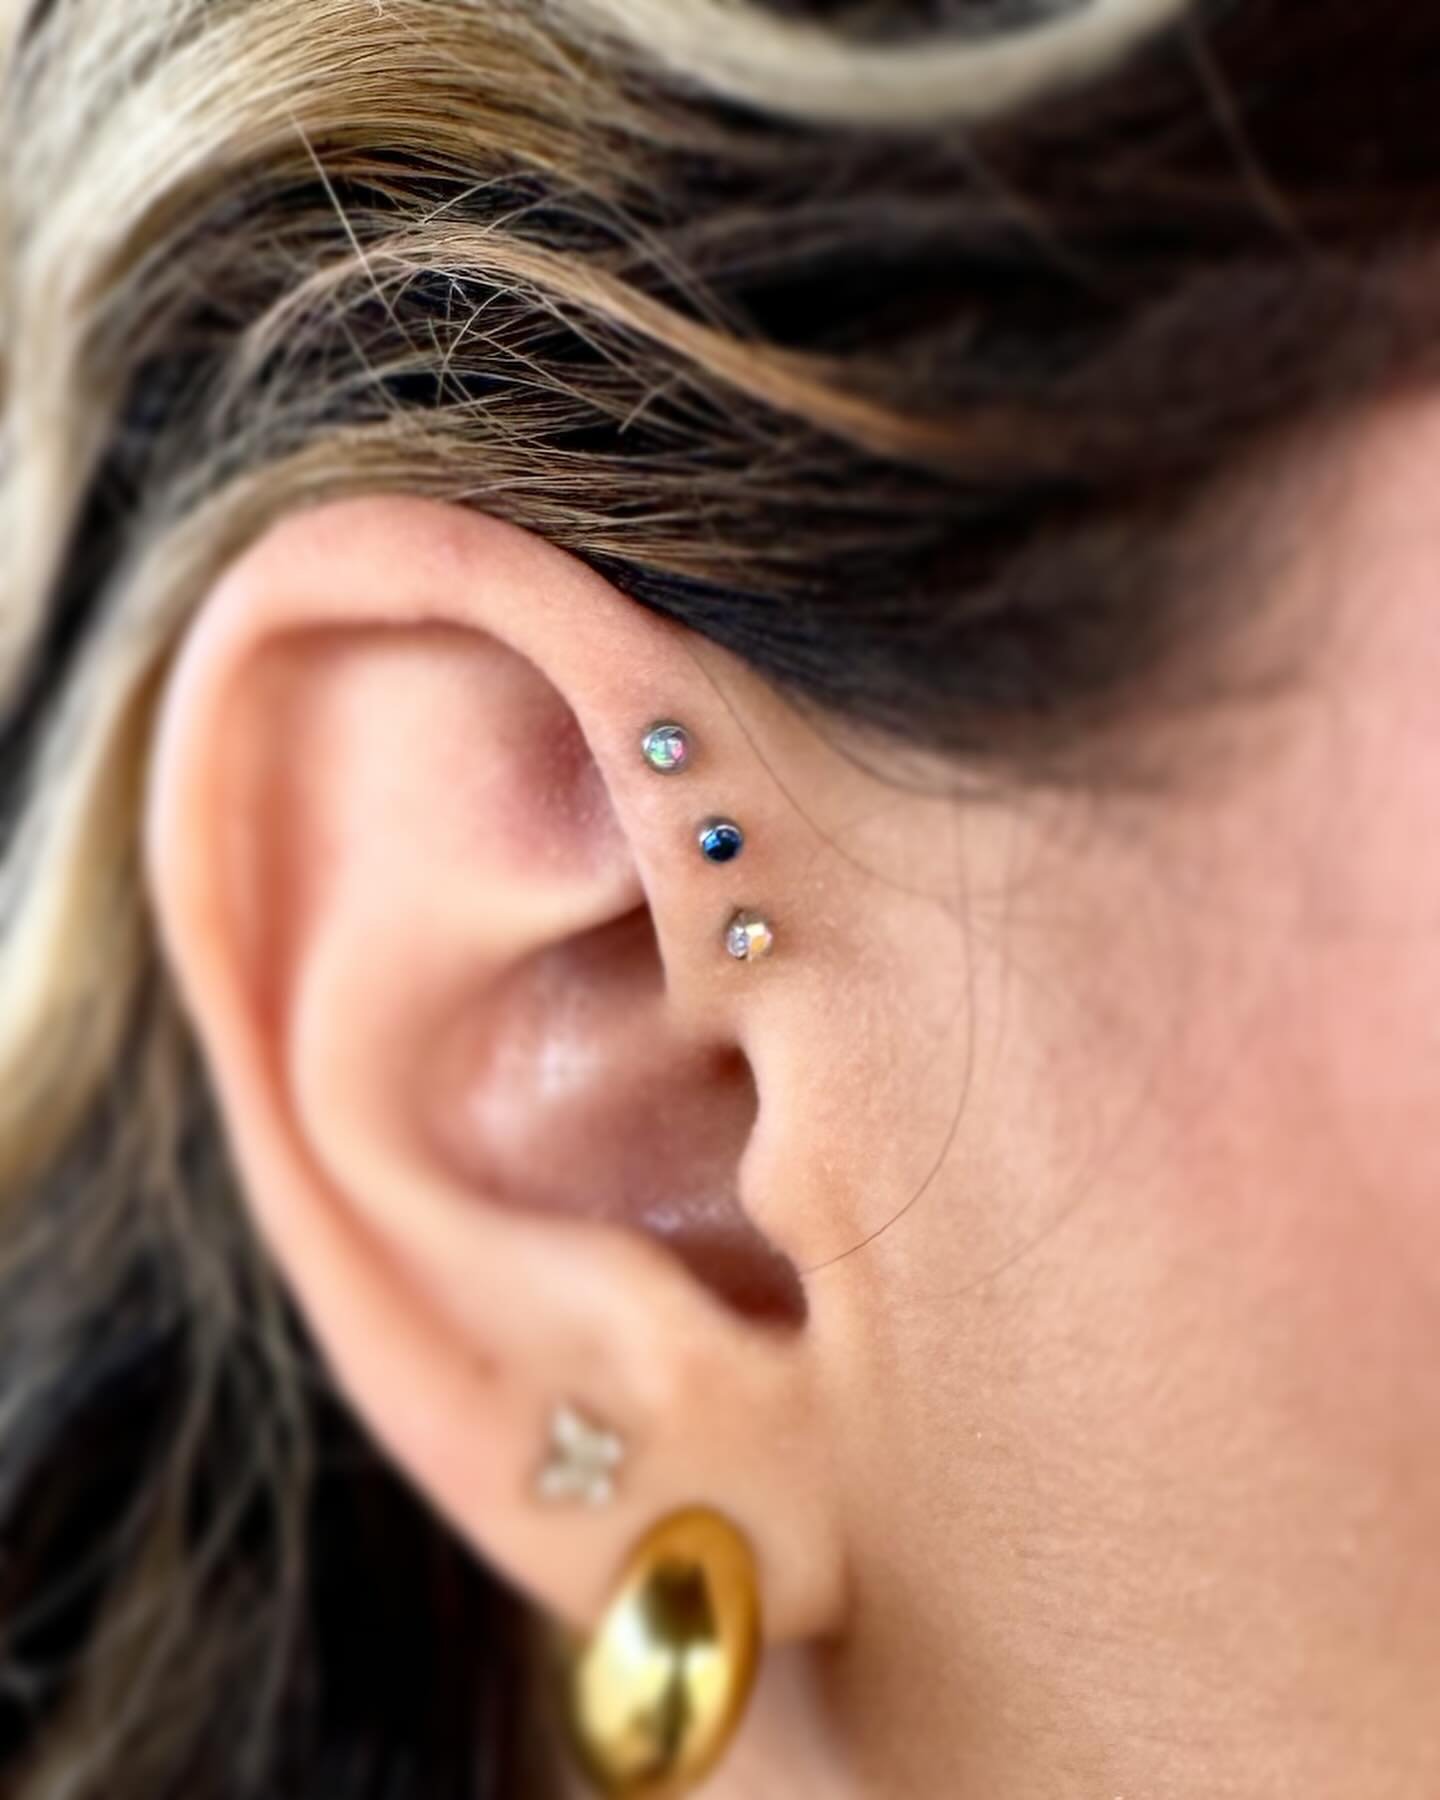 Healed triple Ford helix by Jose Tallon - @finegoldbodyjewelry here at @adornmentbodyart with @neometaljewelry titanium jewelry.

Jose pierces Monday through Thursday from 12 to 6 last Piercing is taken at 5:30 .
To book an appointment call 760-565-2